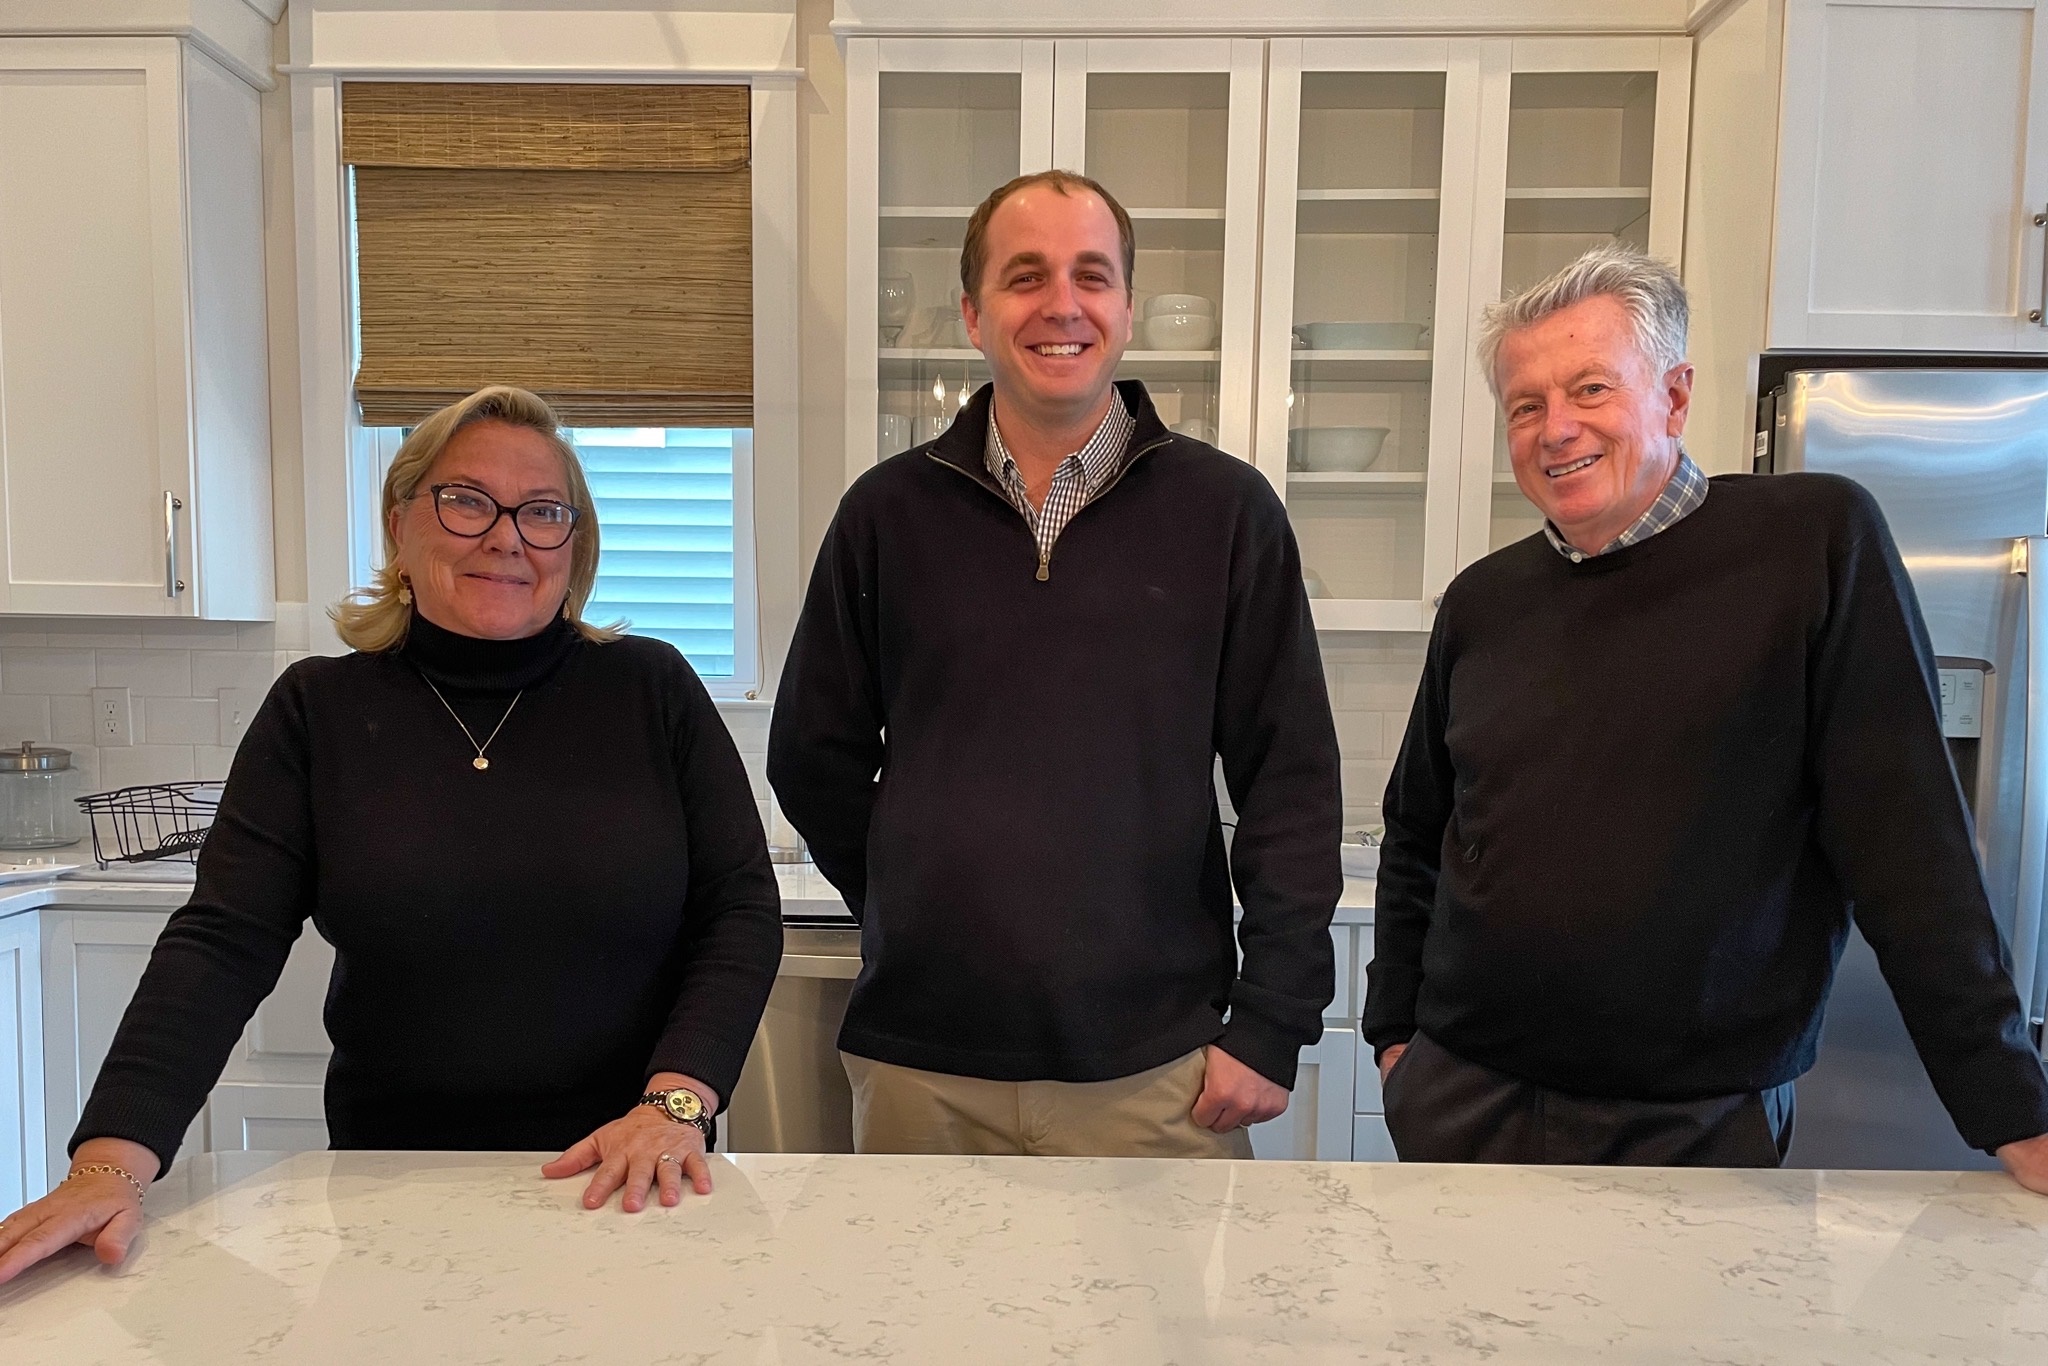 New Agents at Ocean City's Berger Realty Are a Family Affair OCNJ Daily